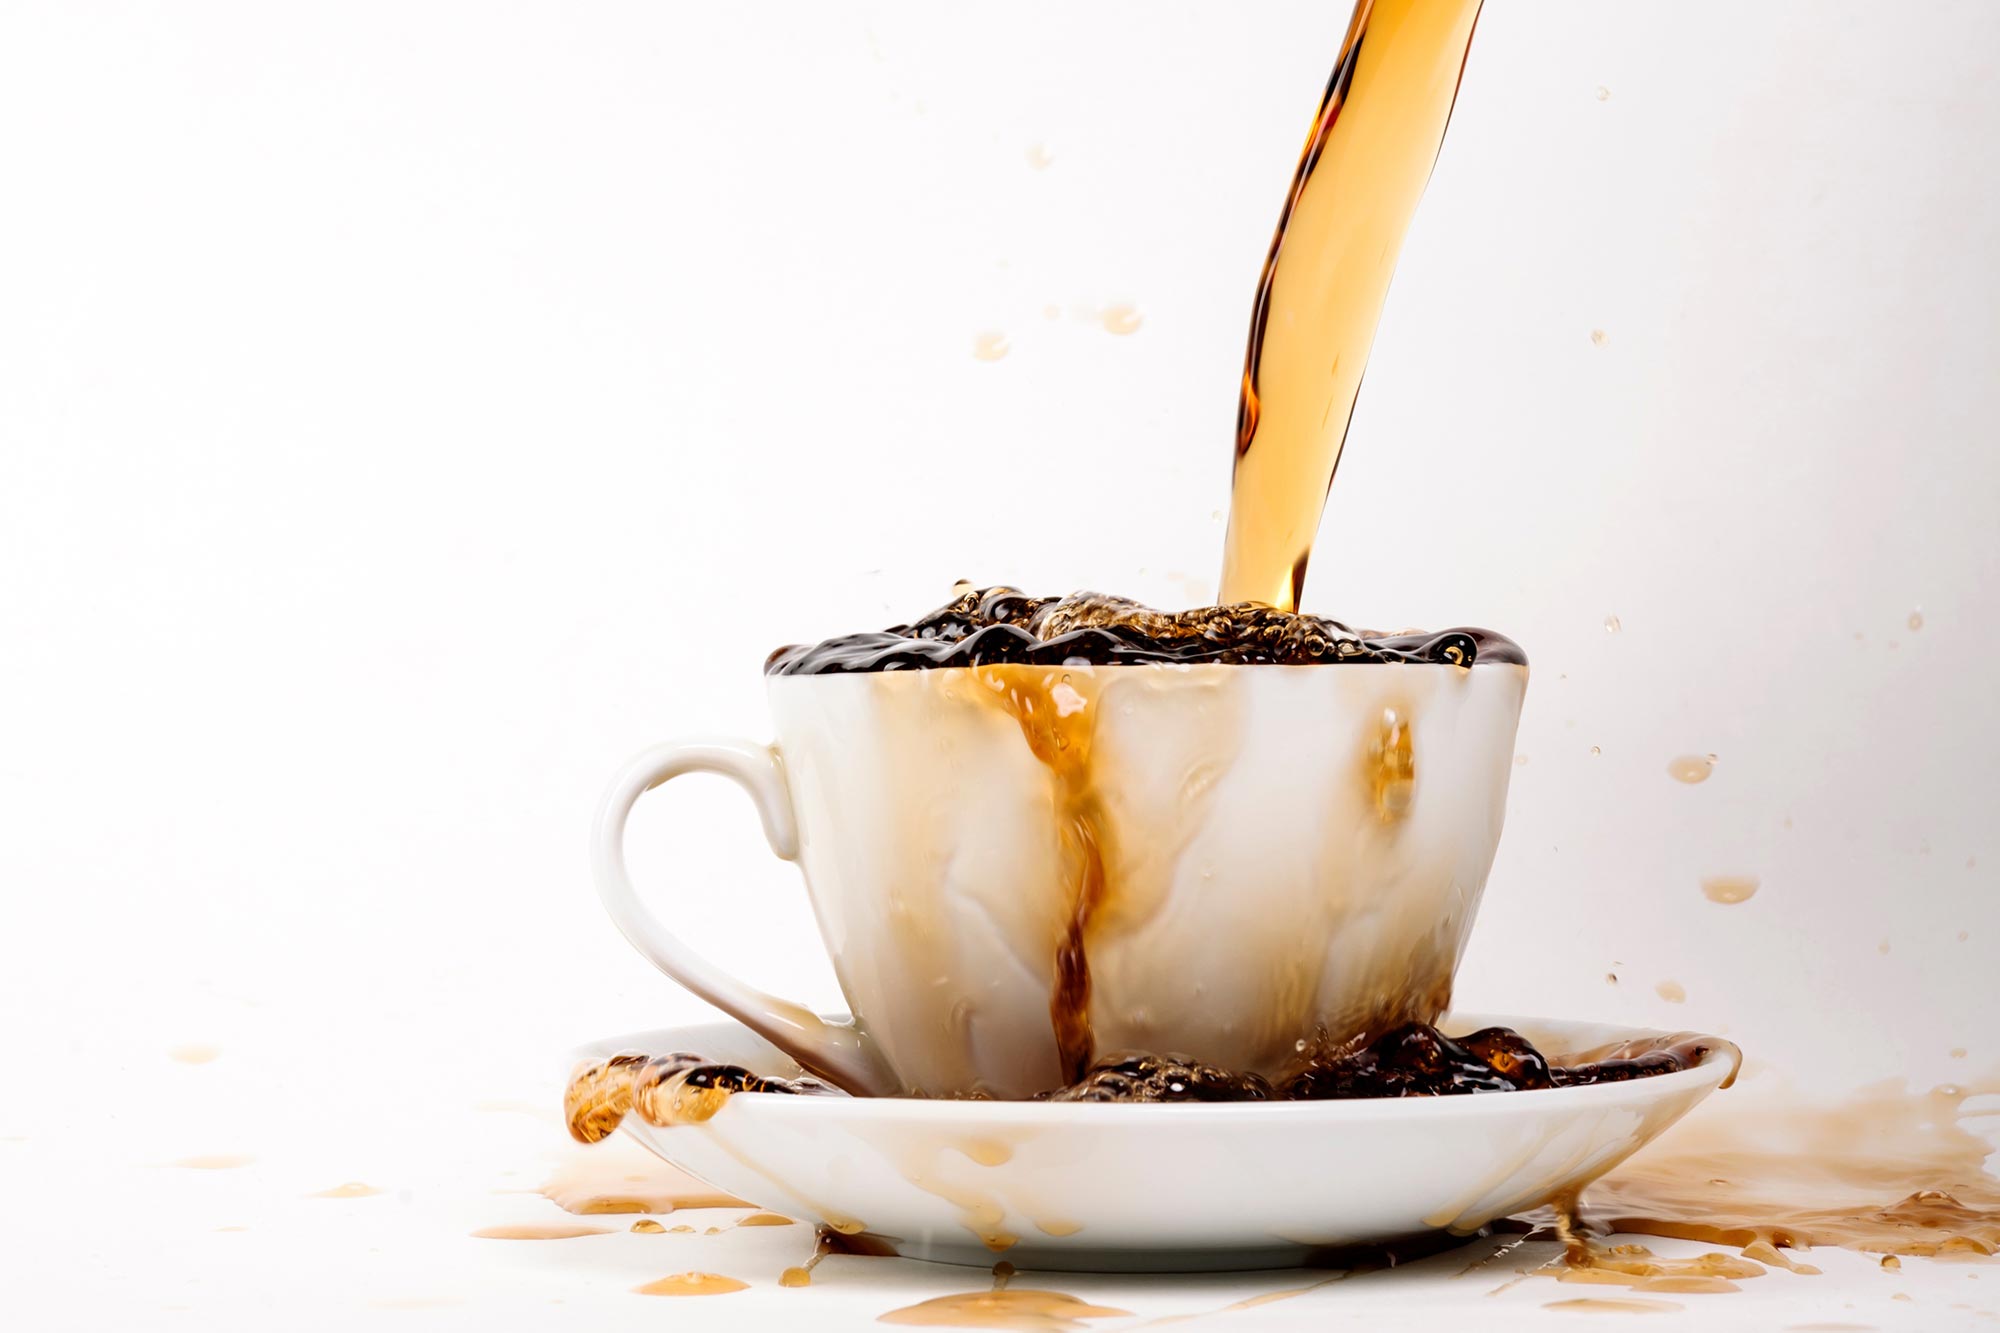 Risks of excessive caffeine consumption in extreme diets